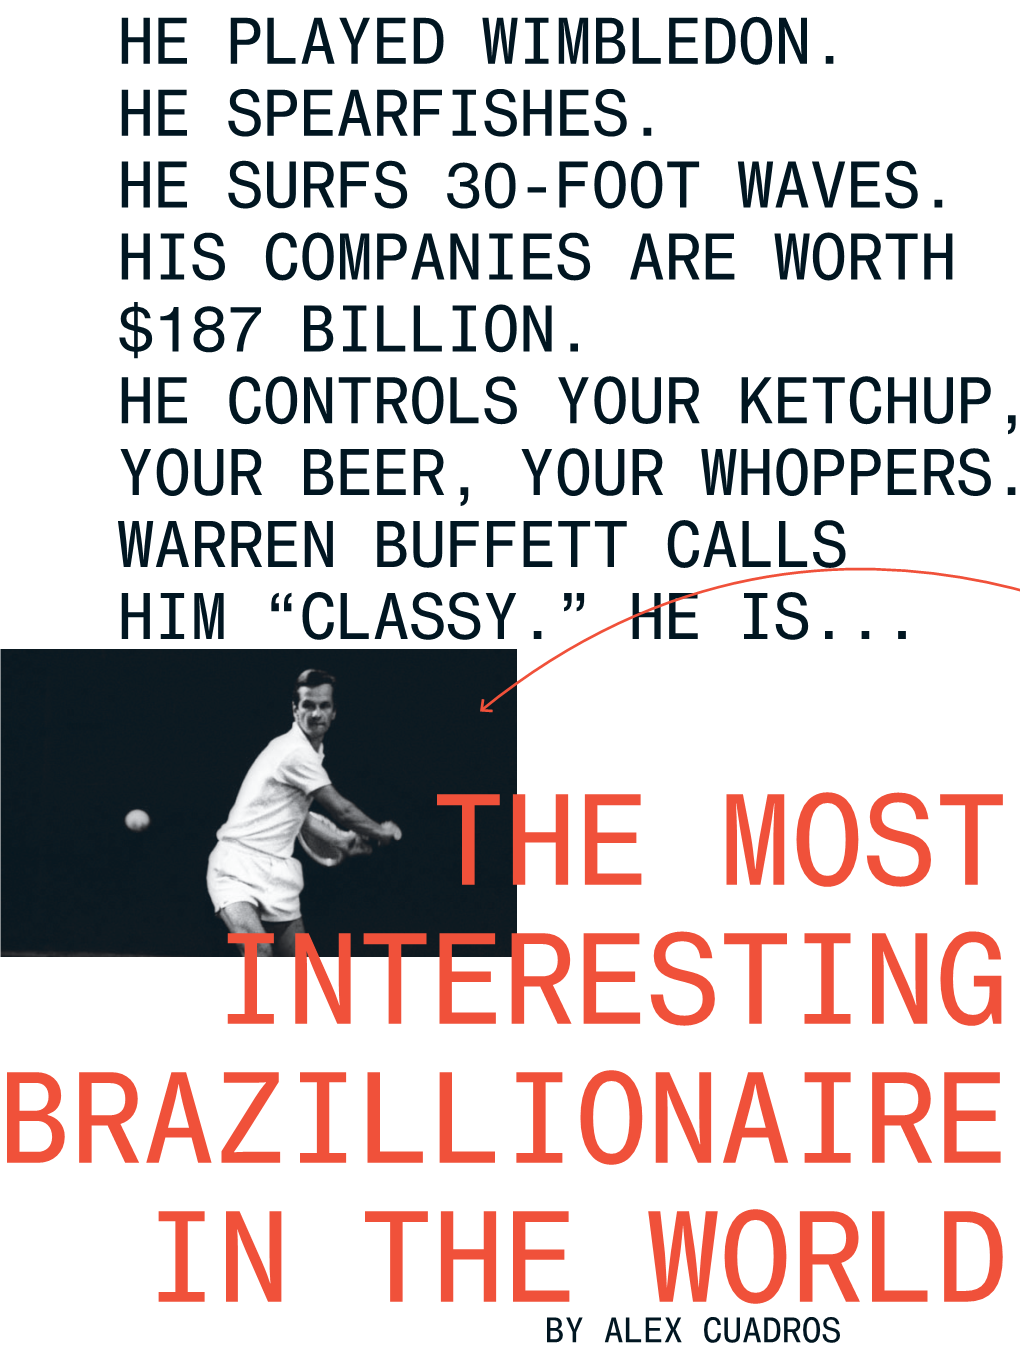 The Most Interesting Brazillionaire in the World by Alex Cuadros He Played Wimbledon